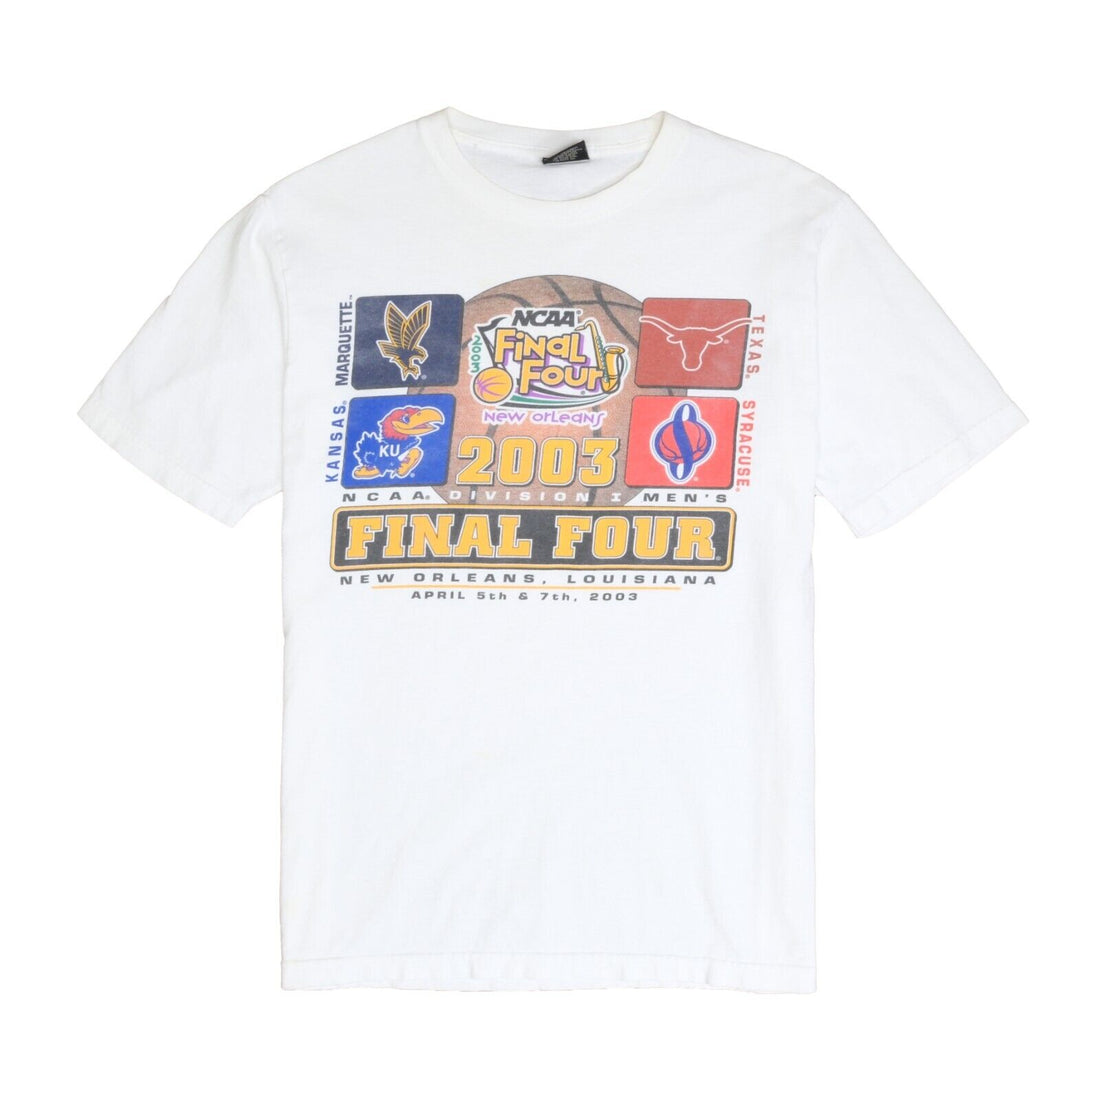 Vintage March Madness Final Four Basketball T-Shirt Size Medium 2003 NCAA